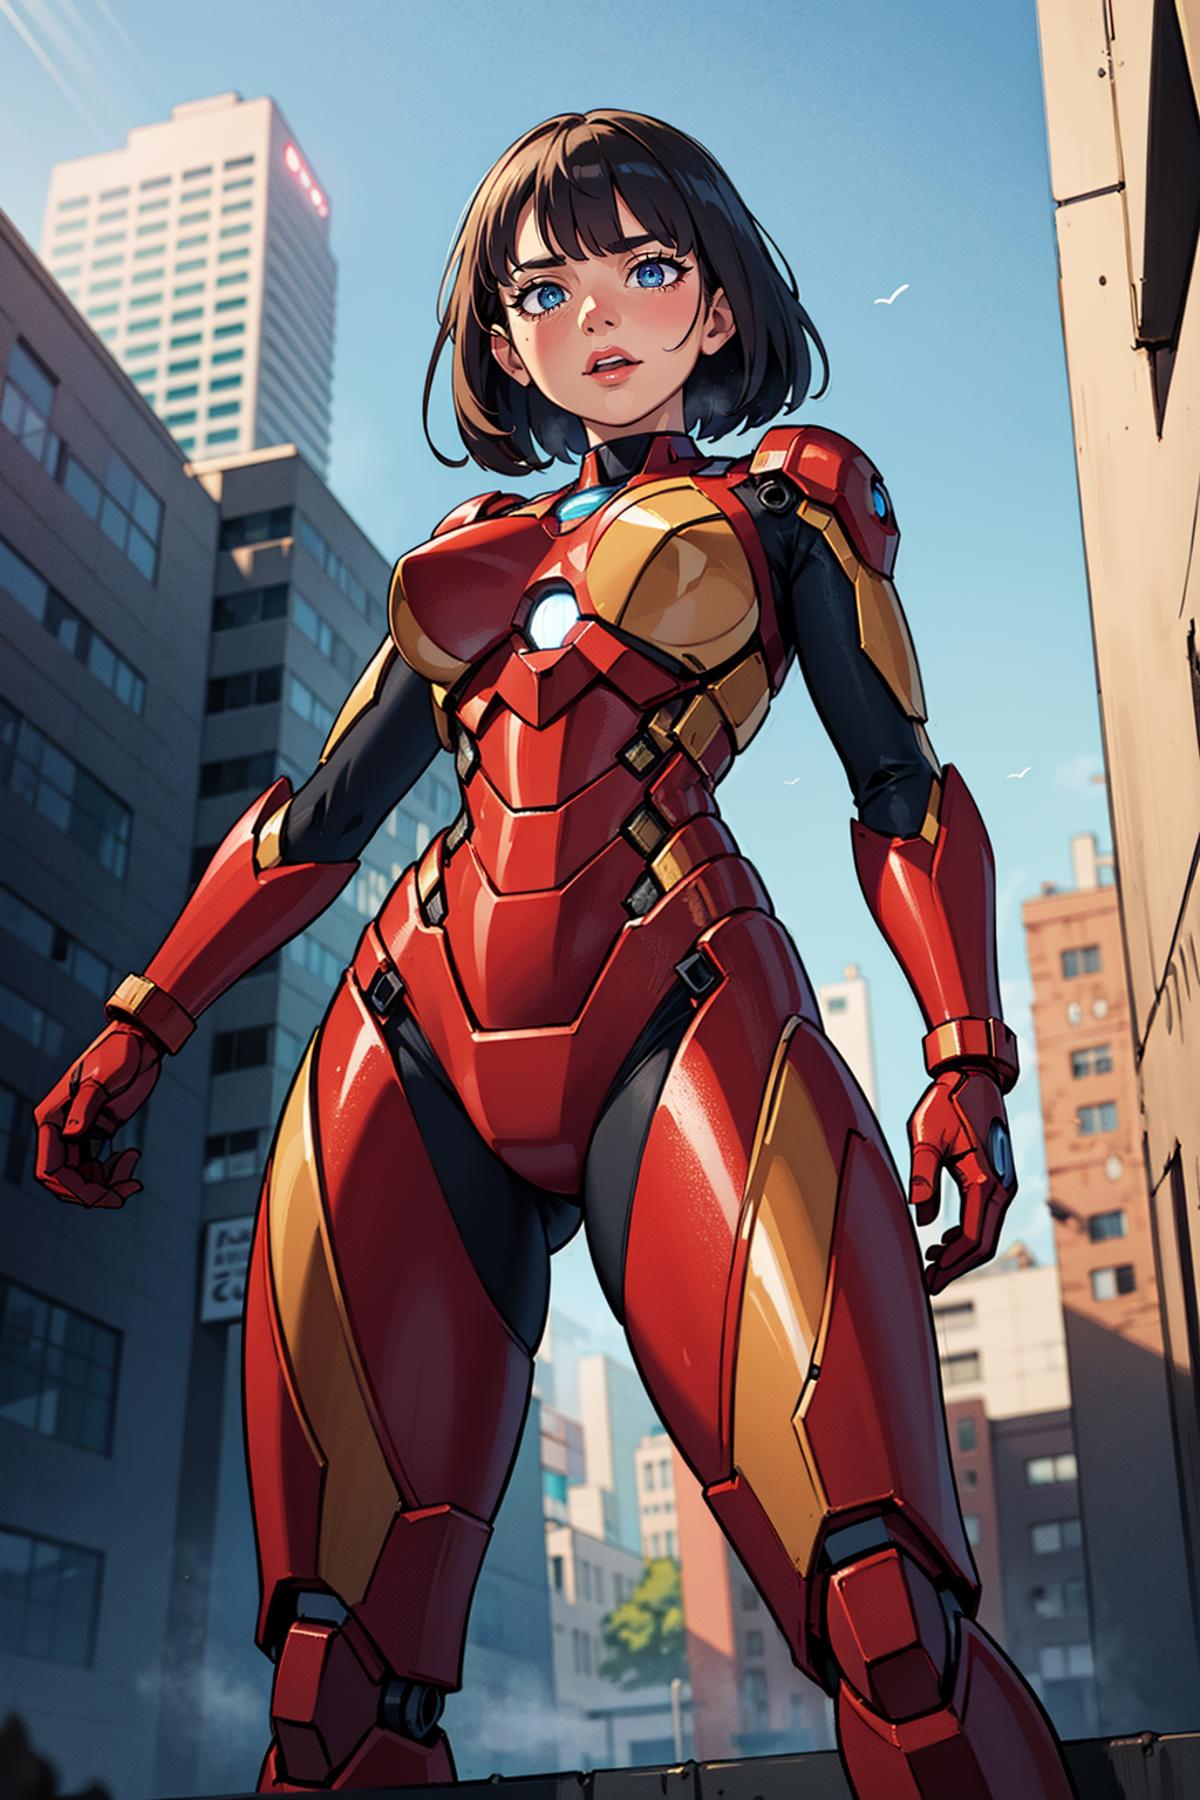 A woman in a red and gold suit standing in front of a building.